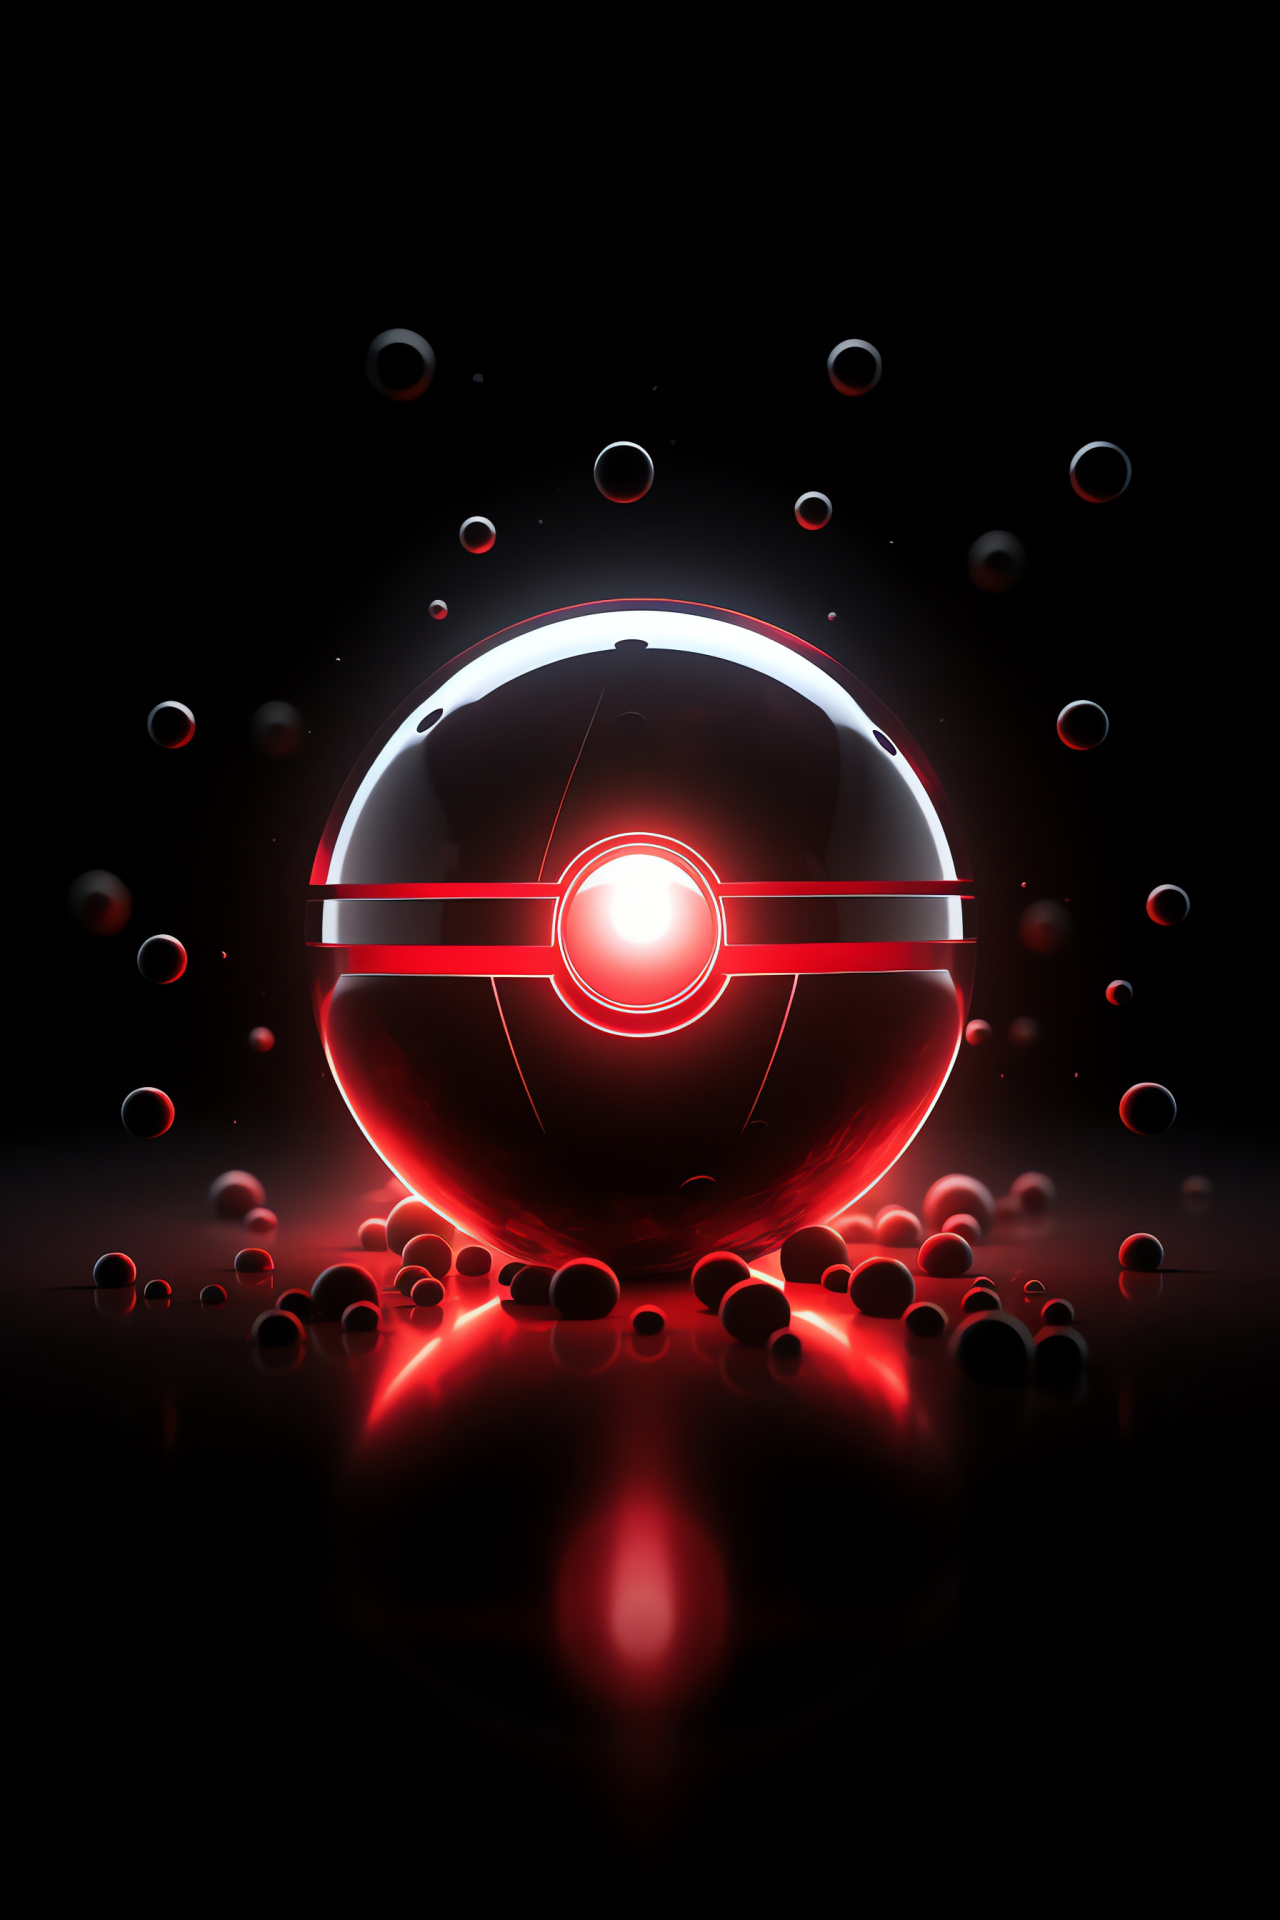 Pokeball icon, Dark abyss, Sphere design, Poised angle, Engagement action, HD Phone Image